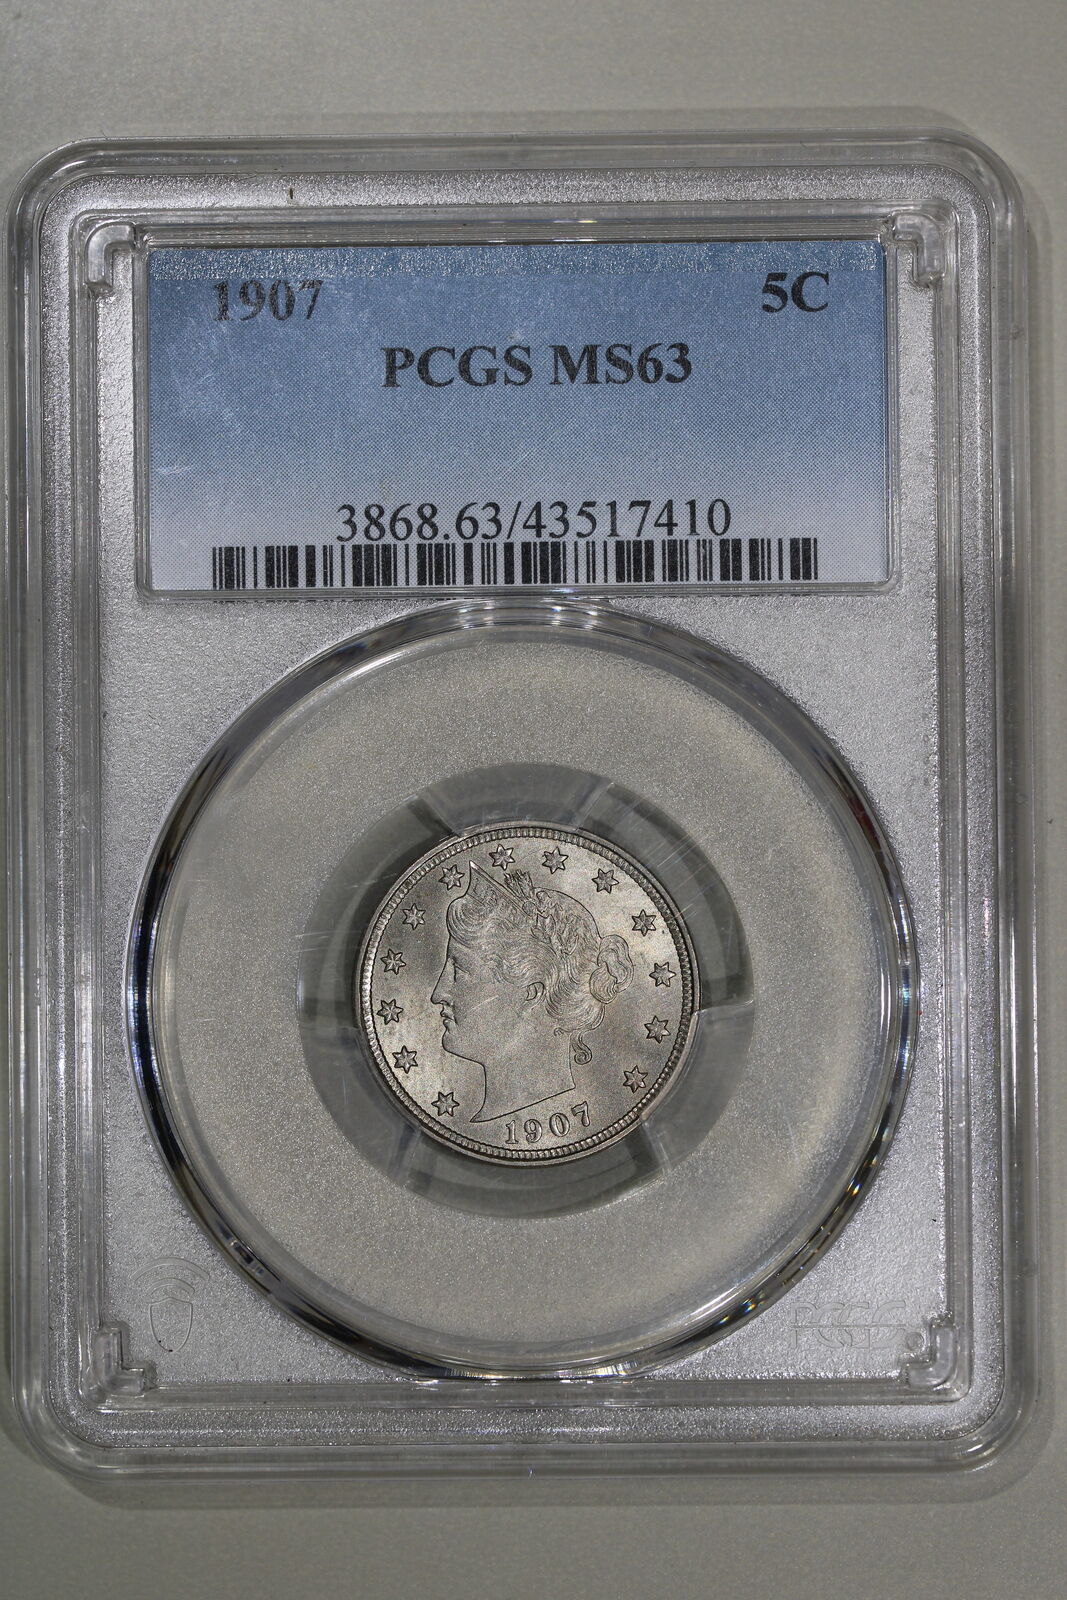 1907 (MS63) Liberty V Nickel 5c PCGS Graded Coin